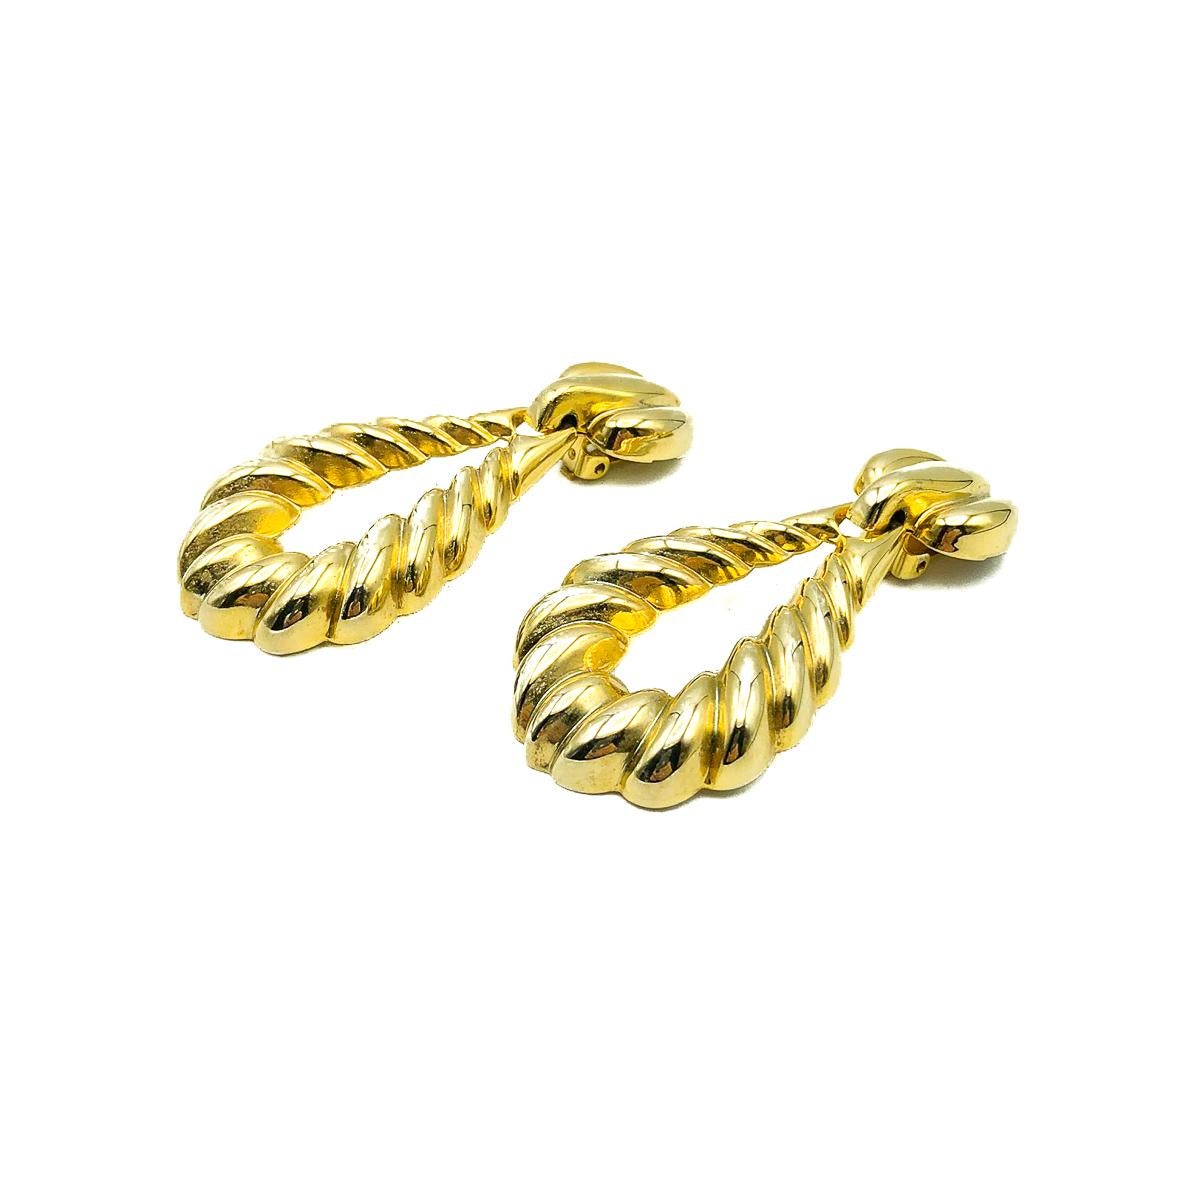 A fabulous example of the forever classic Vintage Door Knocker Earring. In very good vintage condition. Crafted in gold plated metal. Approx. 7.2cms. These beauties are certain to elevate your look every time. 

Established in 2016, this is a